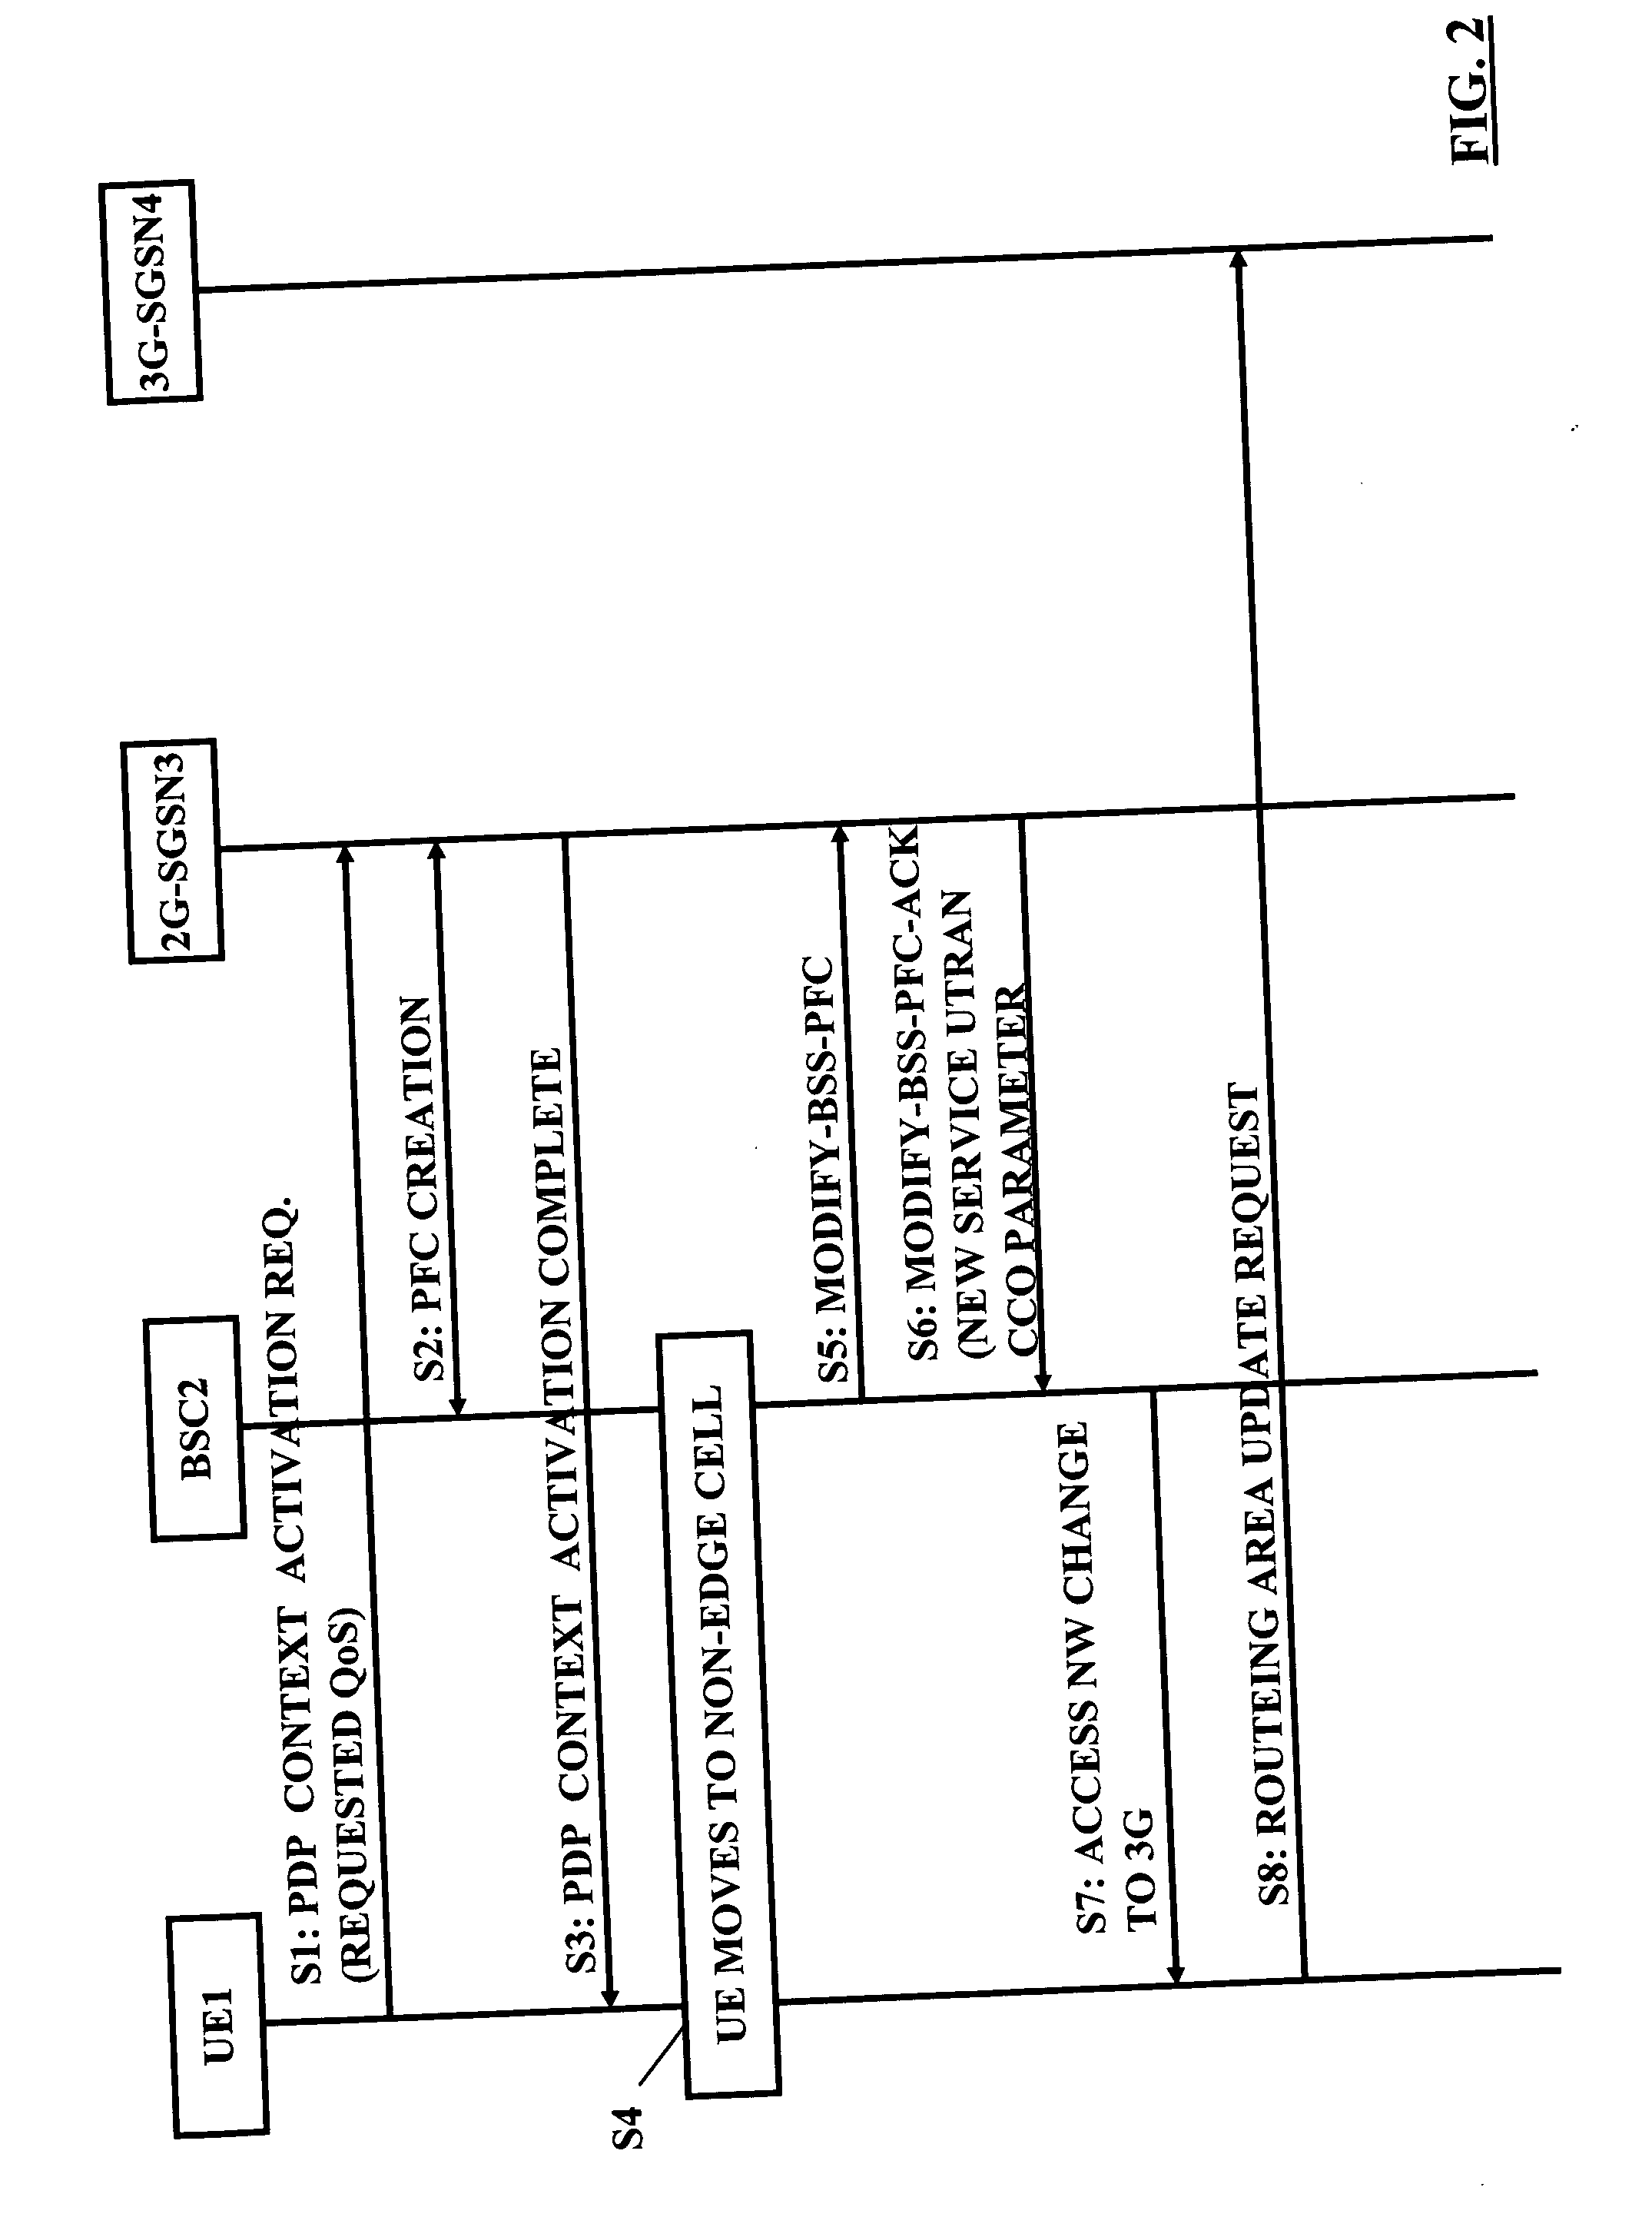 Communication connection control mechanism in a core network ordered access change scenario